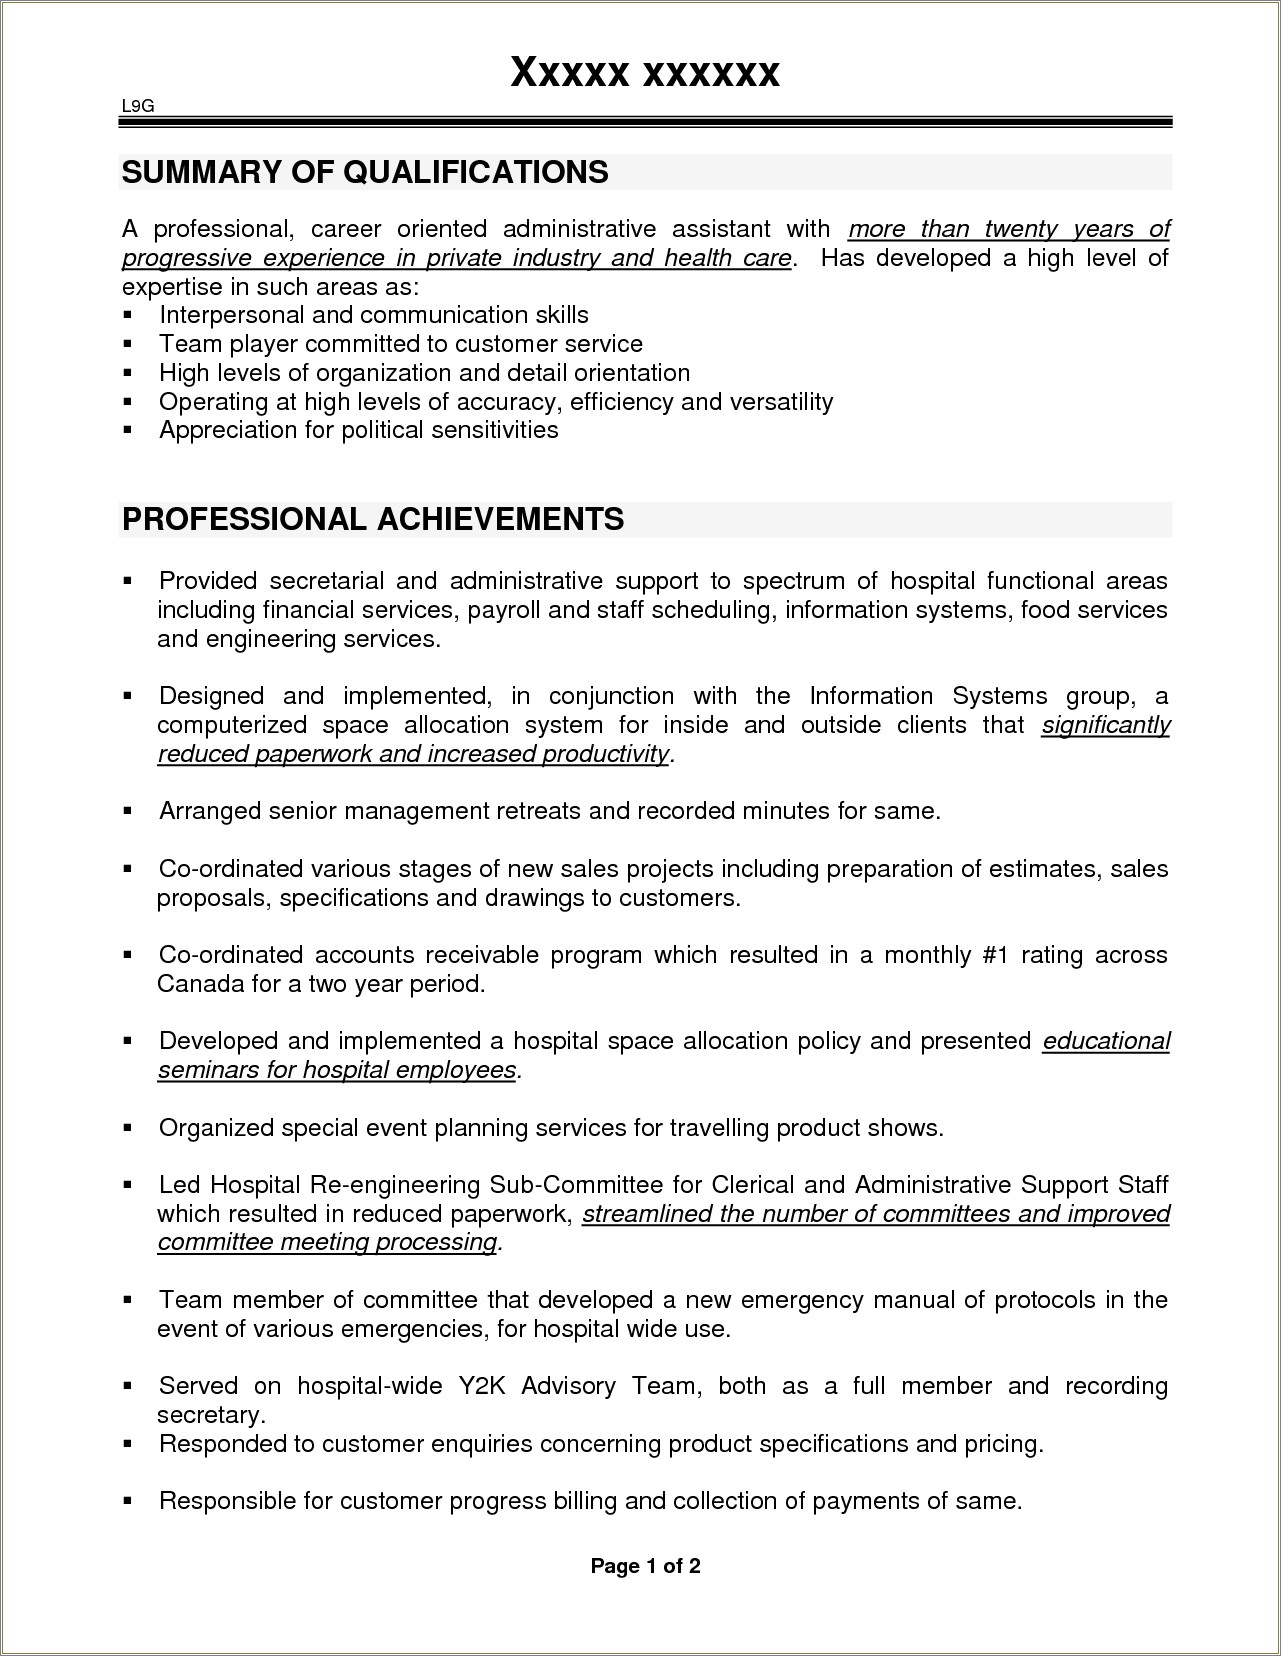 Executive Summary For Resume For Office Assistant